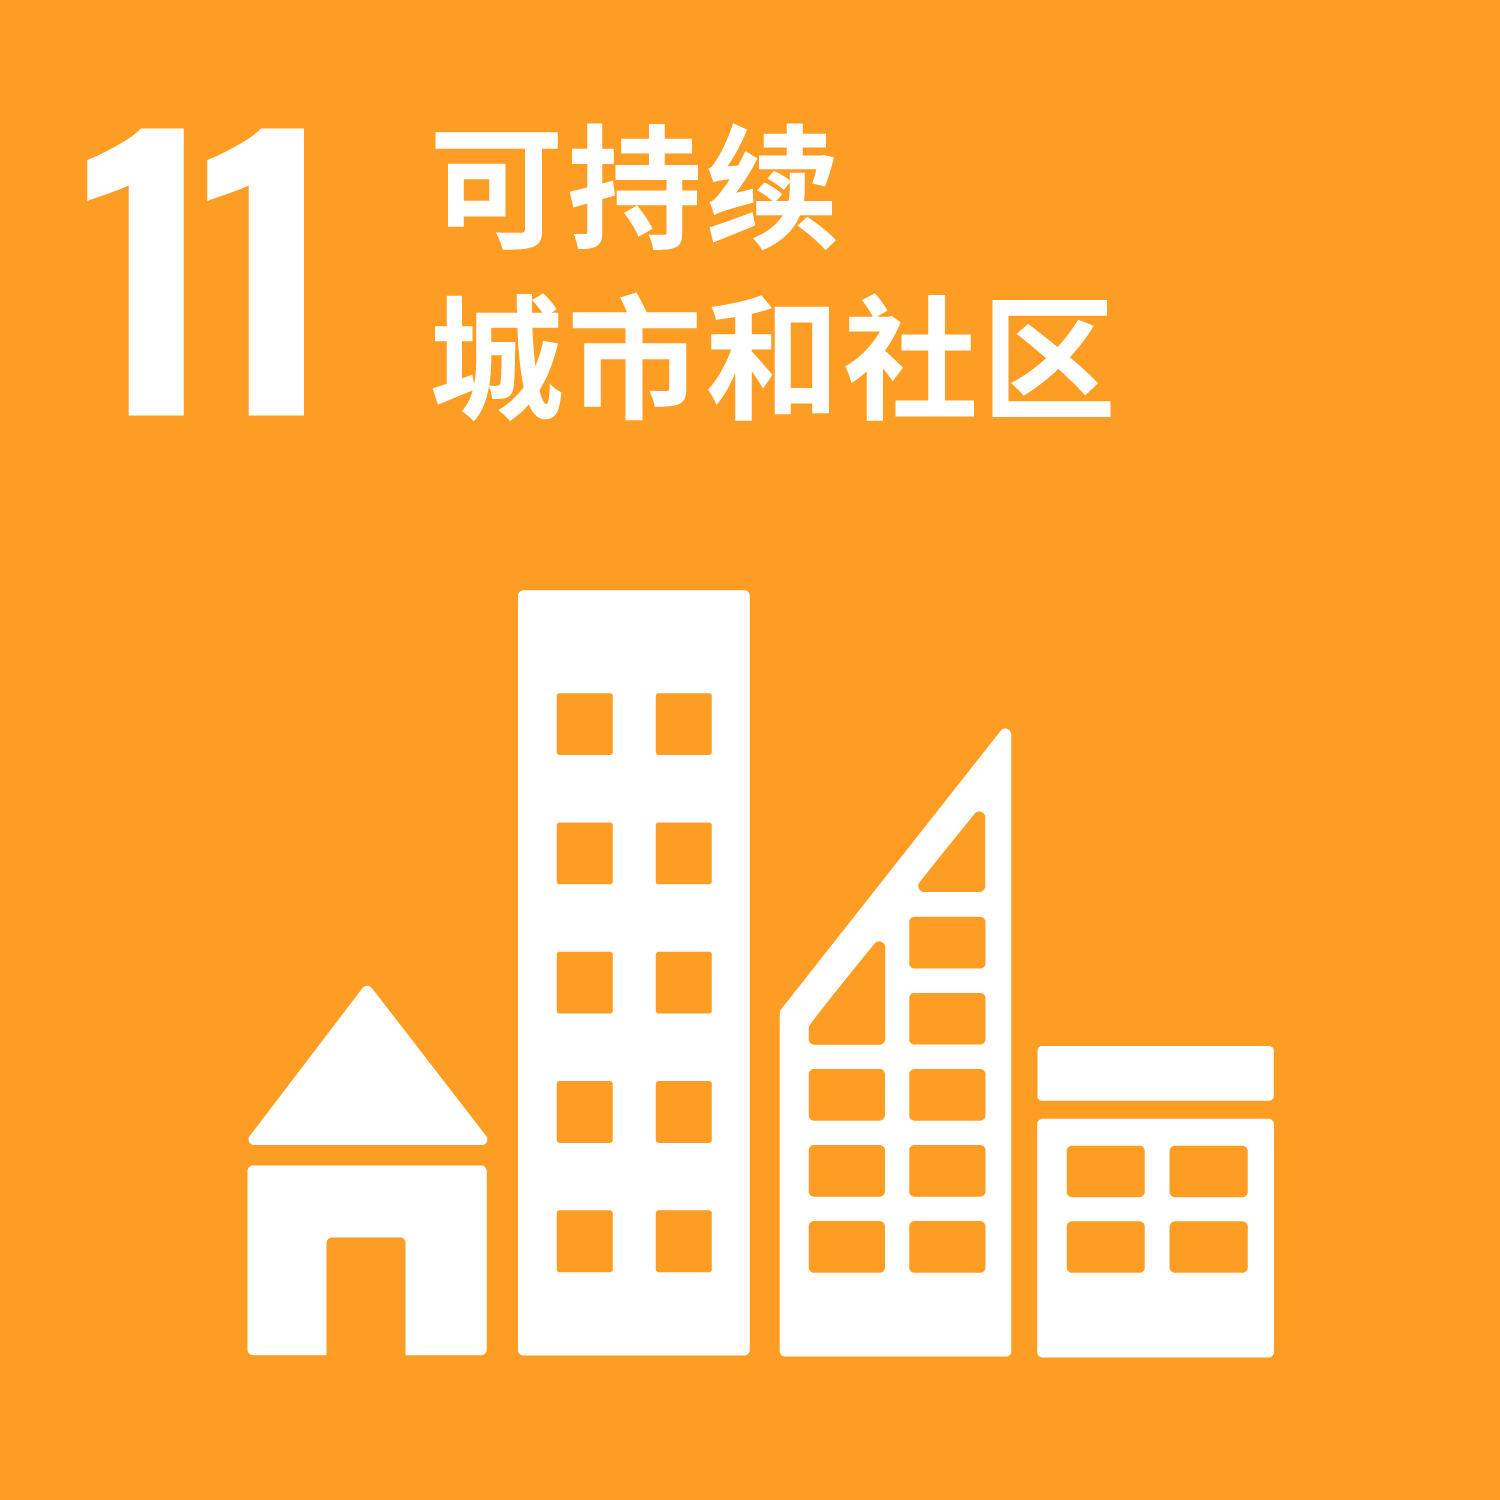 11 - SUSTAINABLE CITIES AND COMMUNITIES